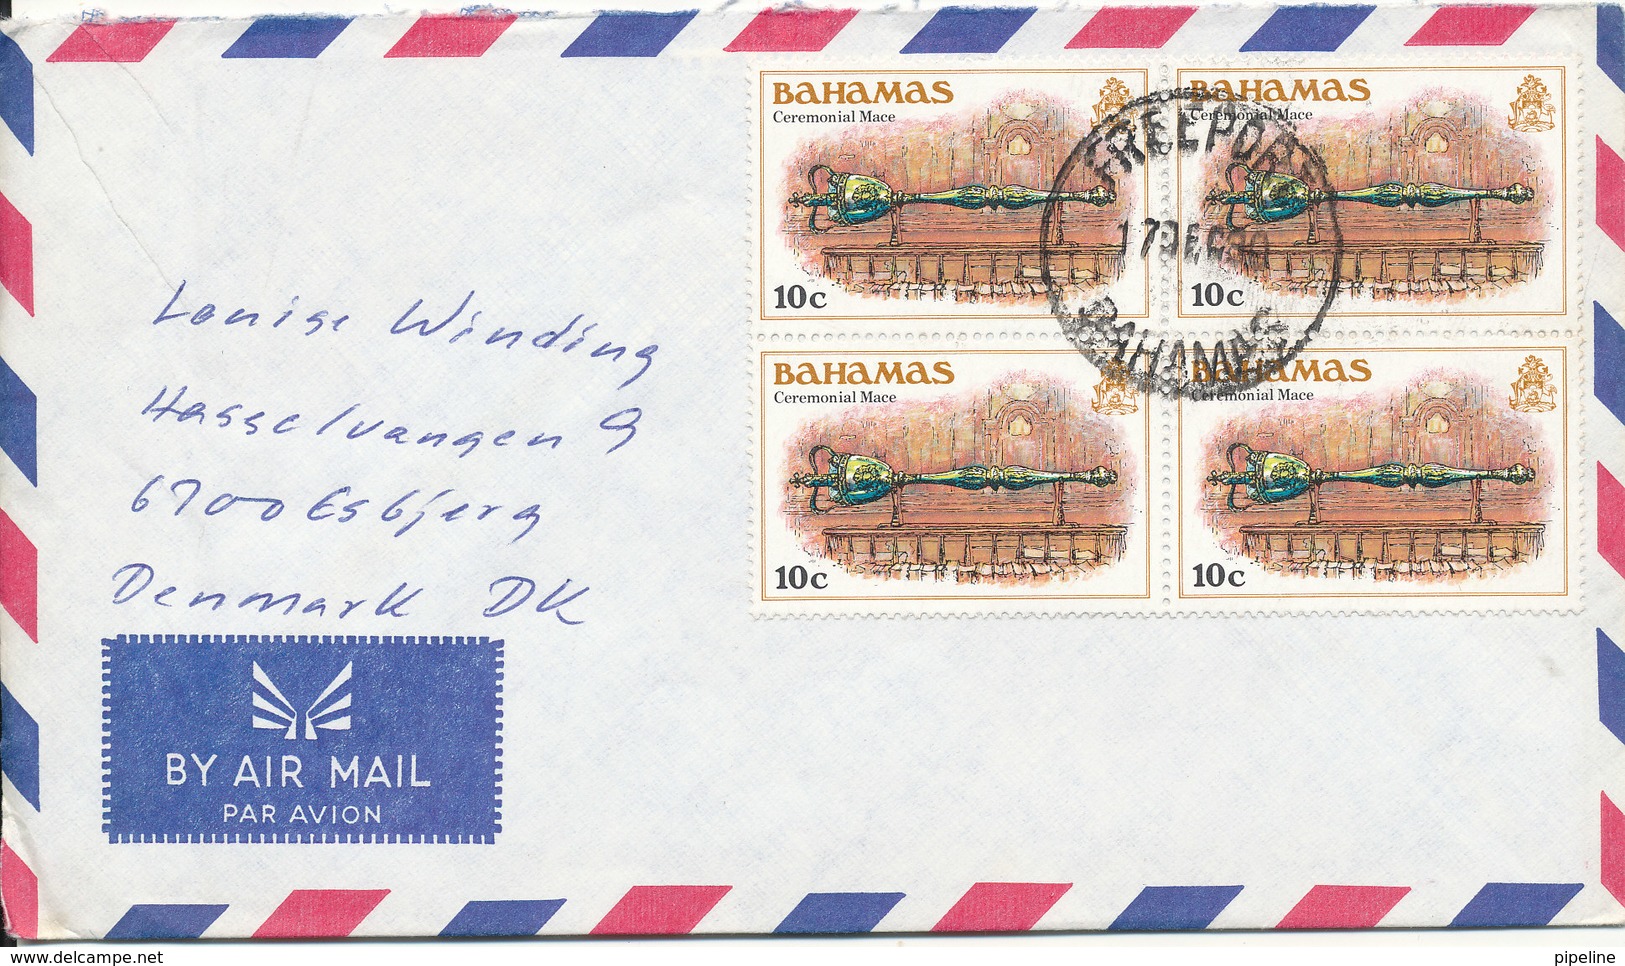 Bahamas Air Mail Cover Sent To Denmark Freeport 17-12-1980 With Block Of 4 - Bahamas (1973-...)